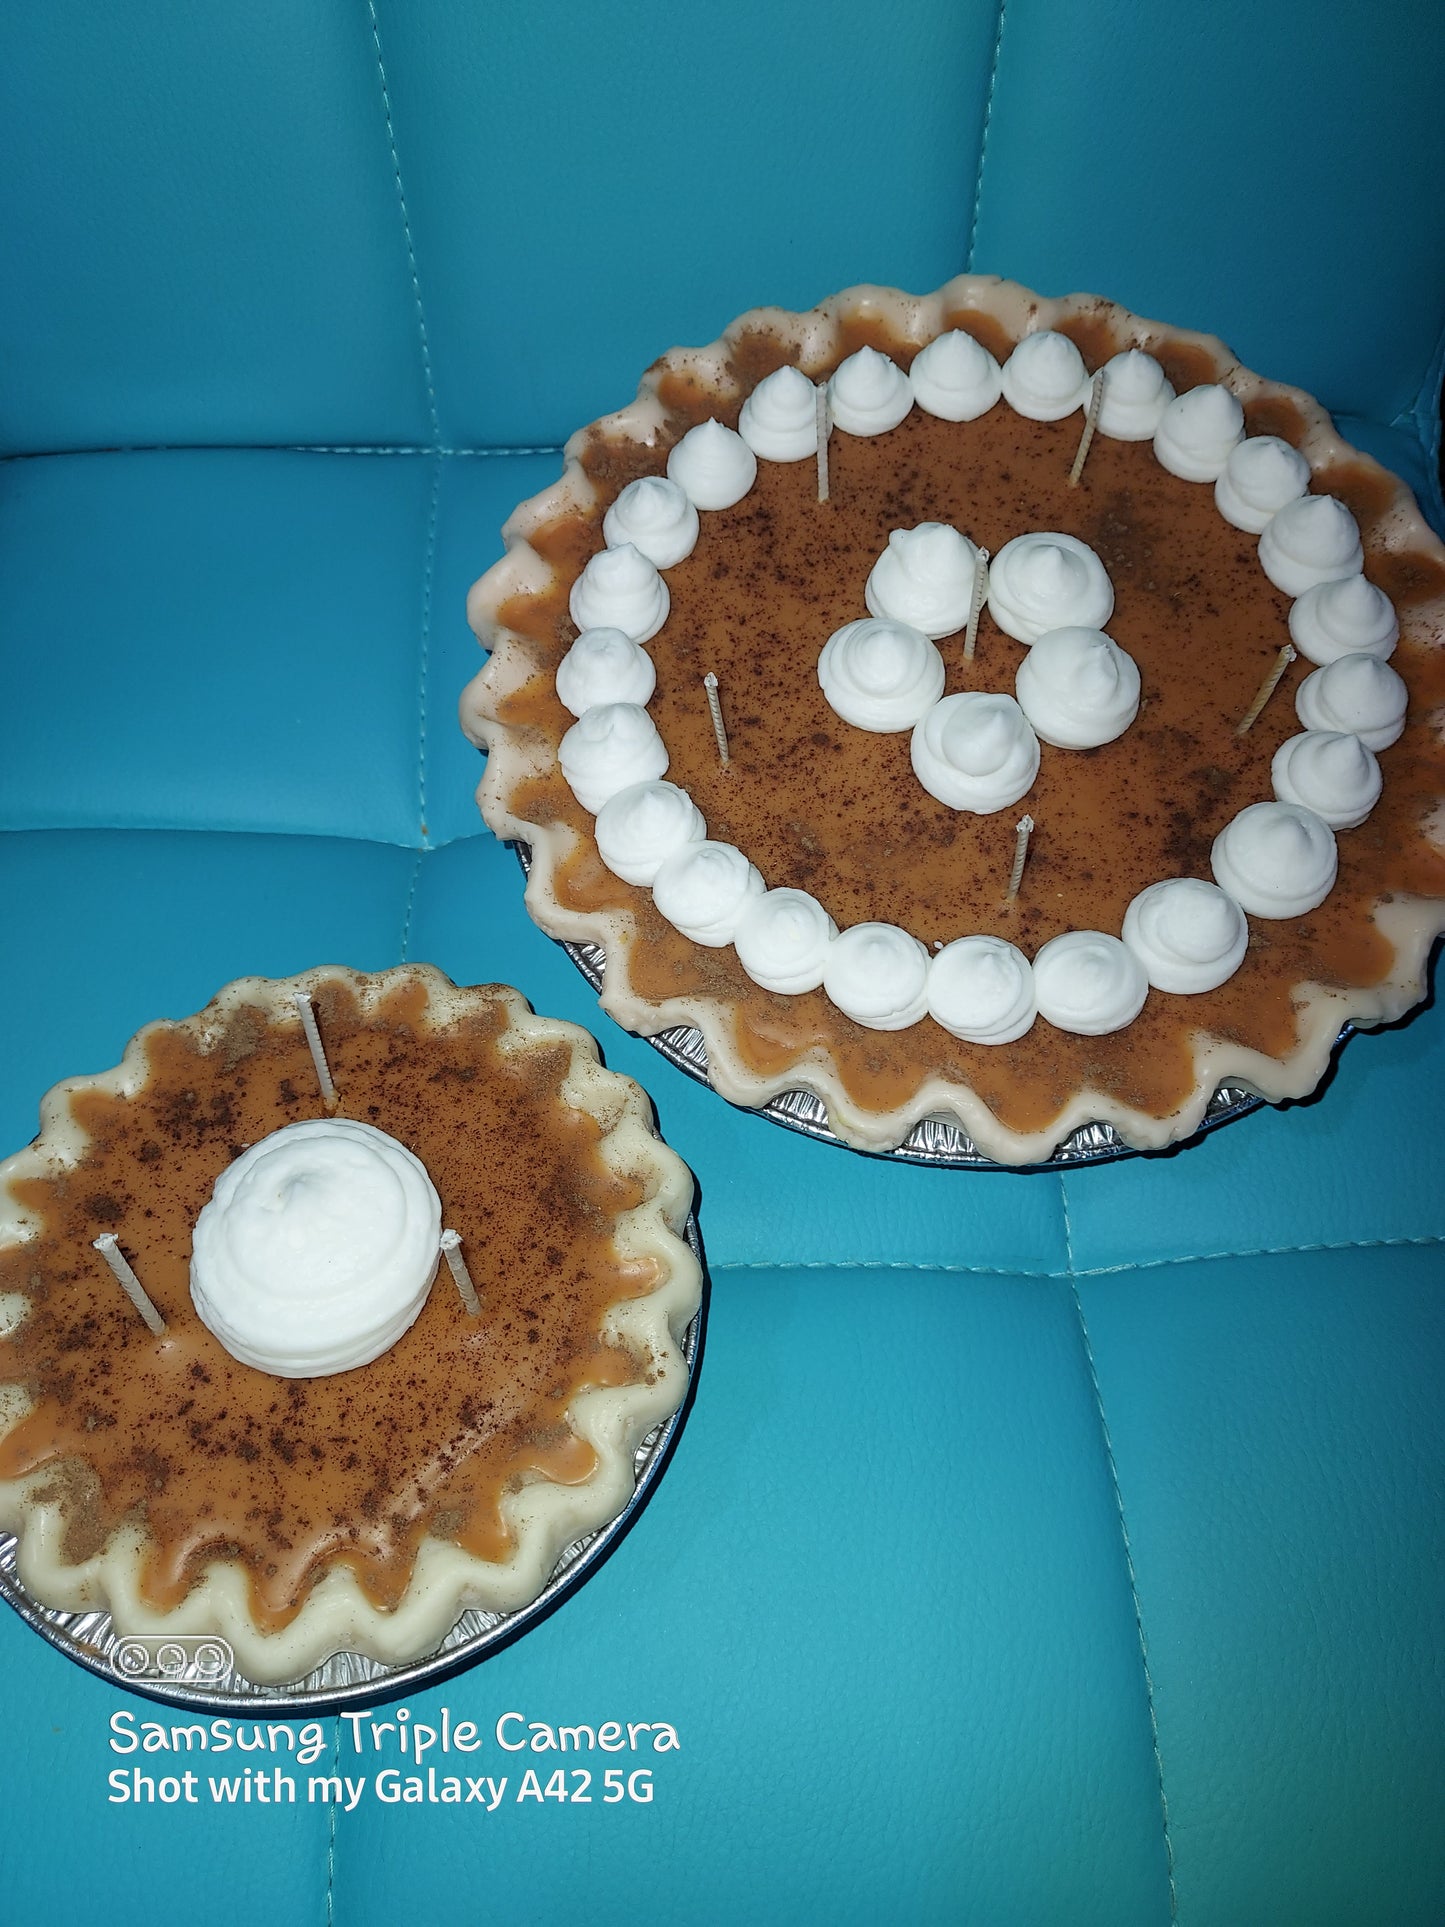 Candle Pies 6" and "9